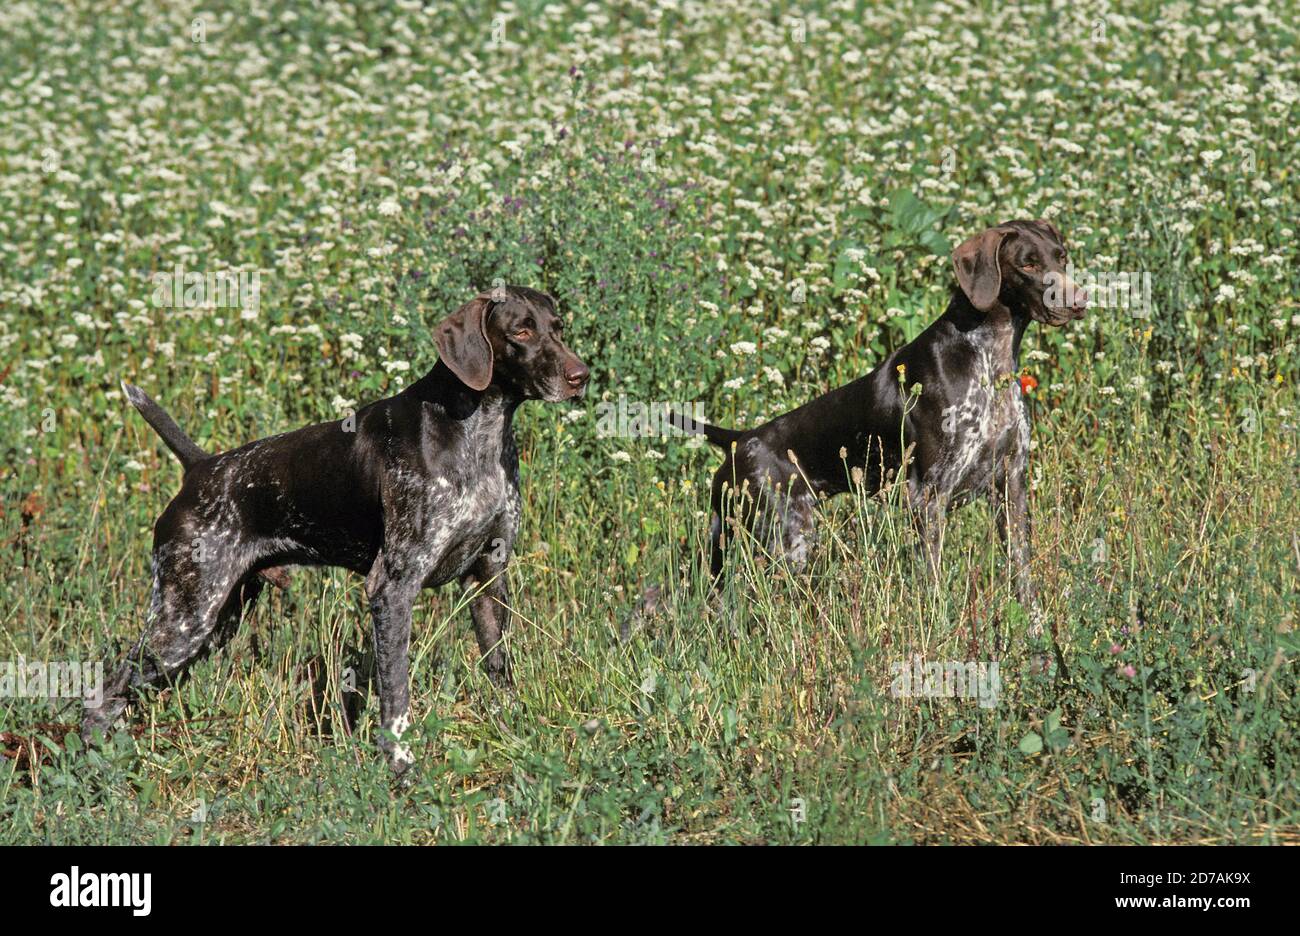 GERMAN SHORT-HAIRED POINTER, ADULTS IN LONG GRASS Stock Photo